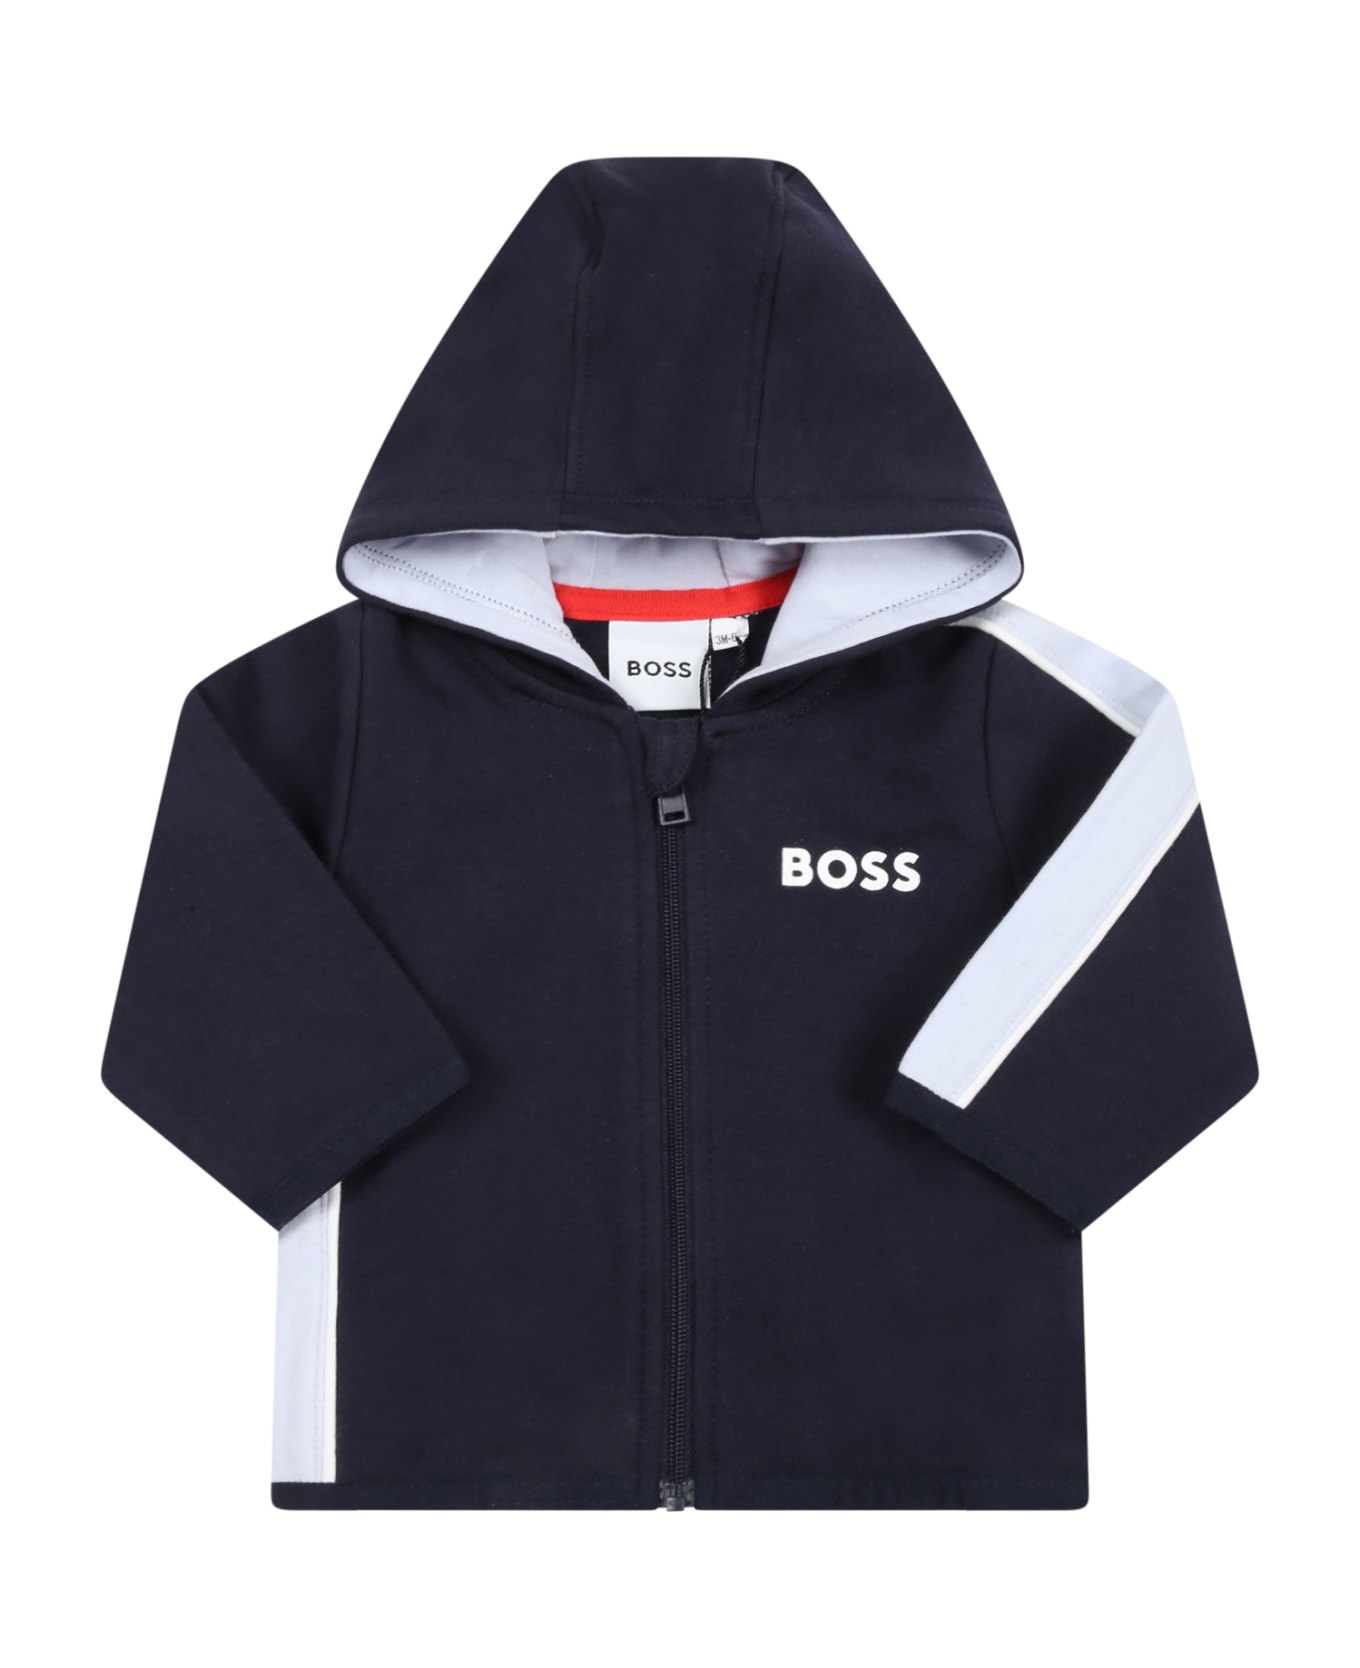 Hugo Boss Blue Tracksuit For Baby Boy With Logo - Blue